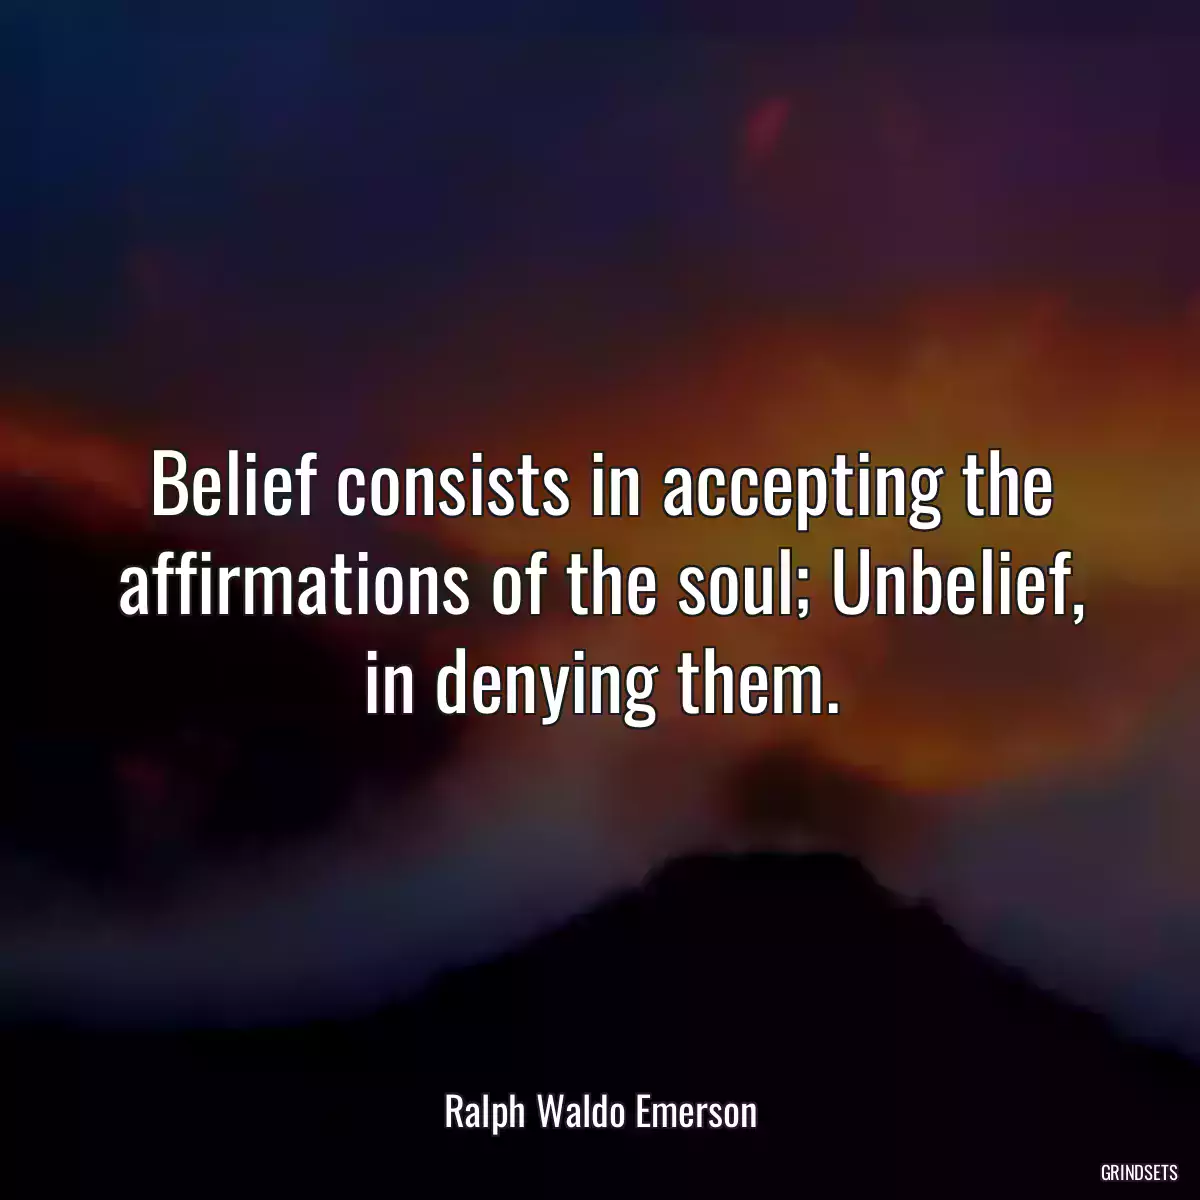 Belief consists in accepting the affirmations of the soul; Unbelief, in denying them.